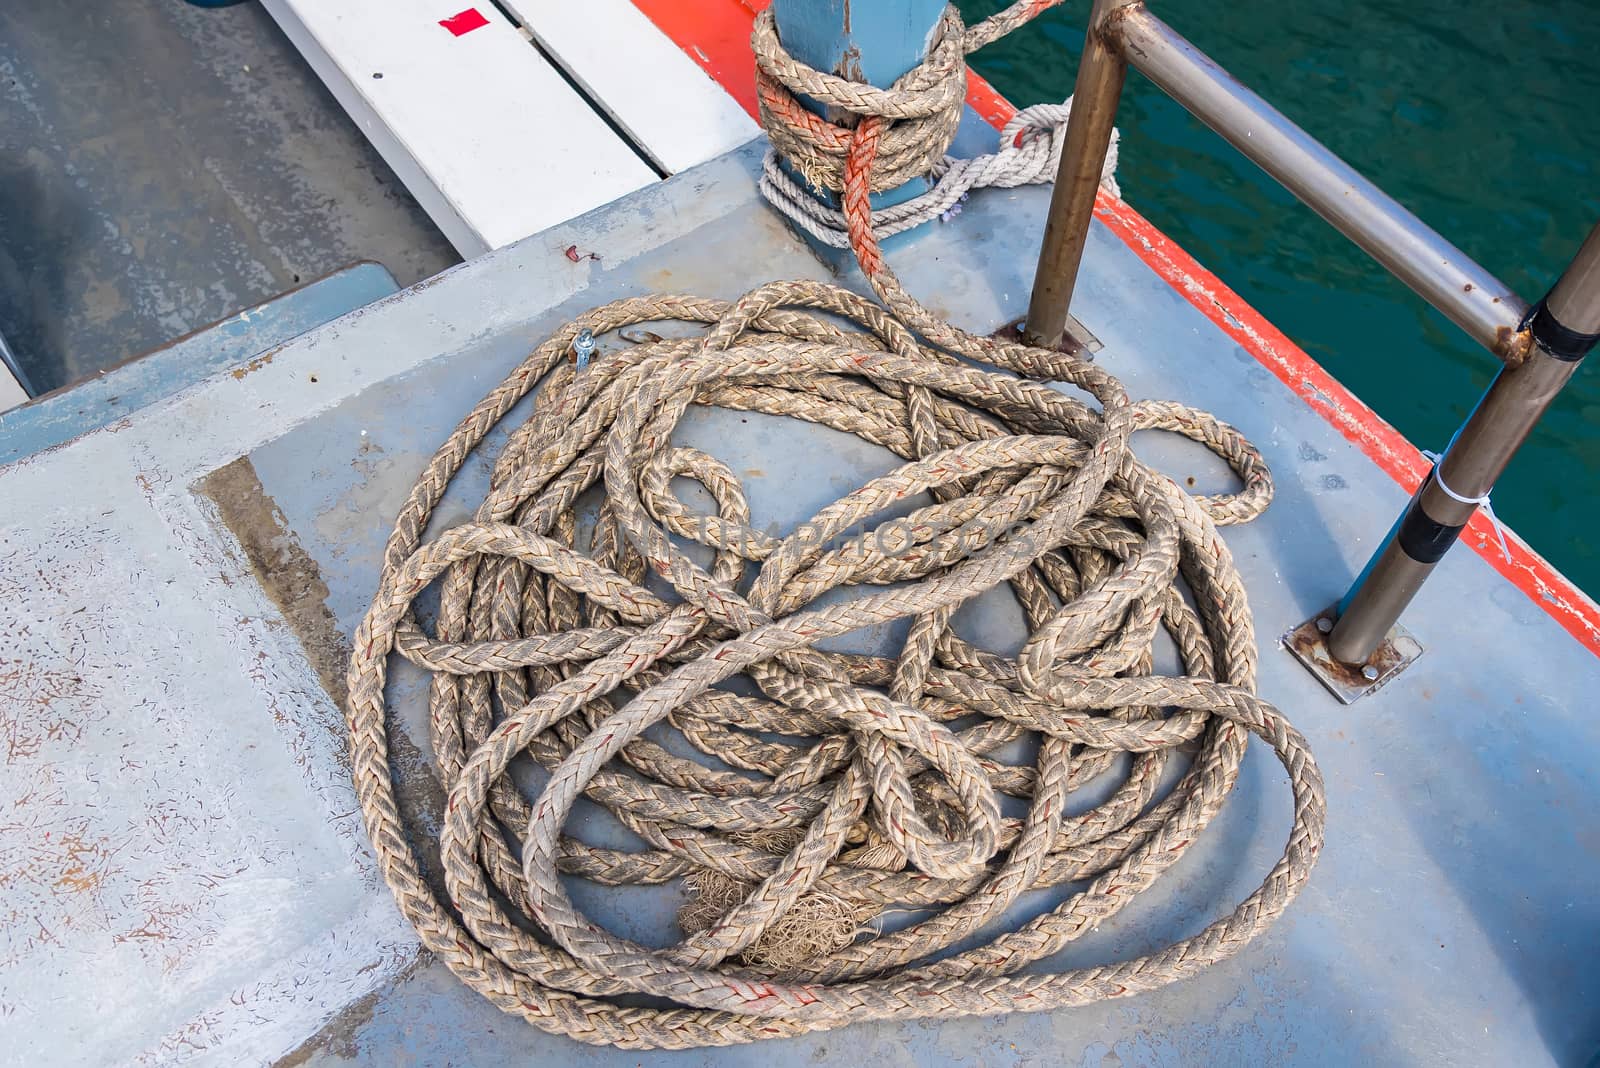 Rope ladder on the ship. by Bubbers